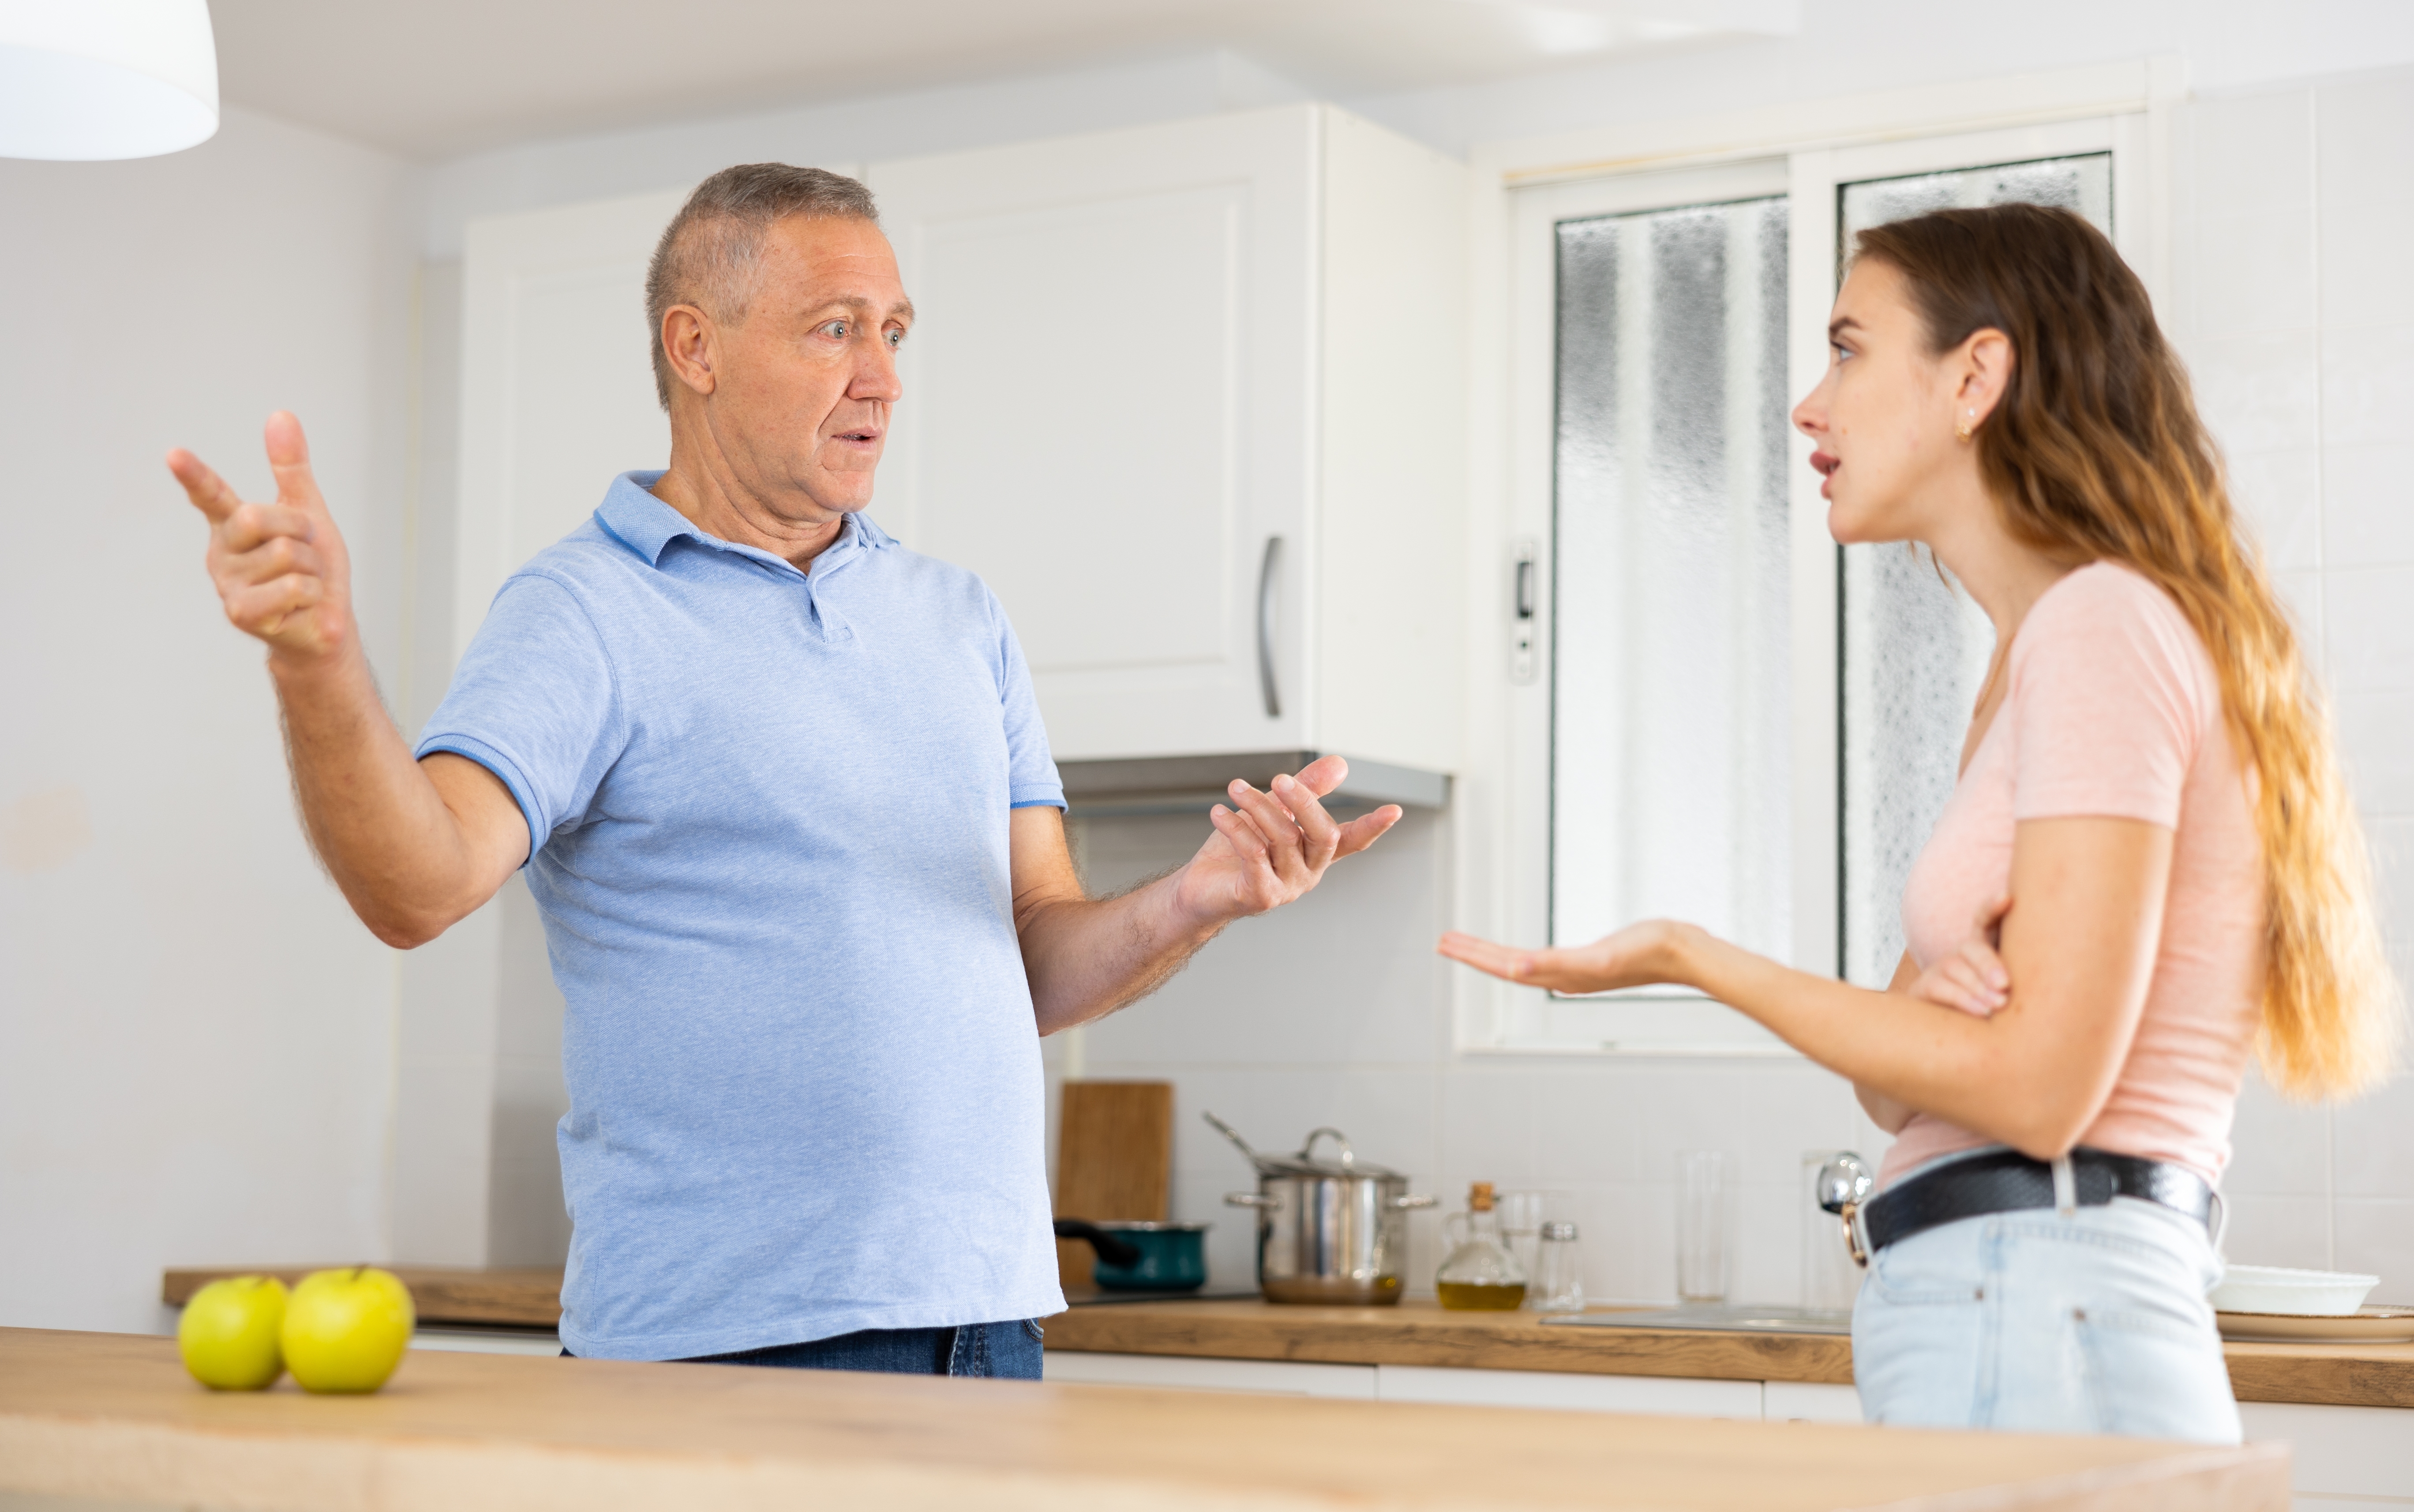 Father and daughter arguing | Source: Shutterstock